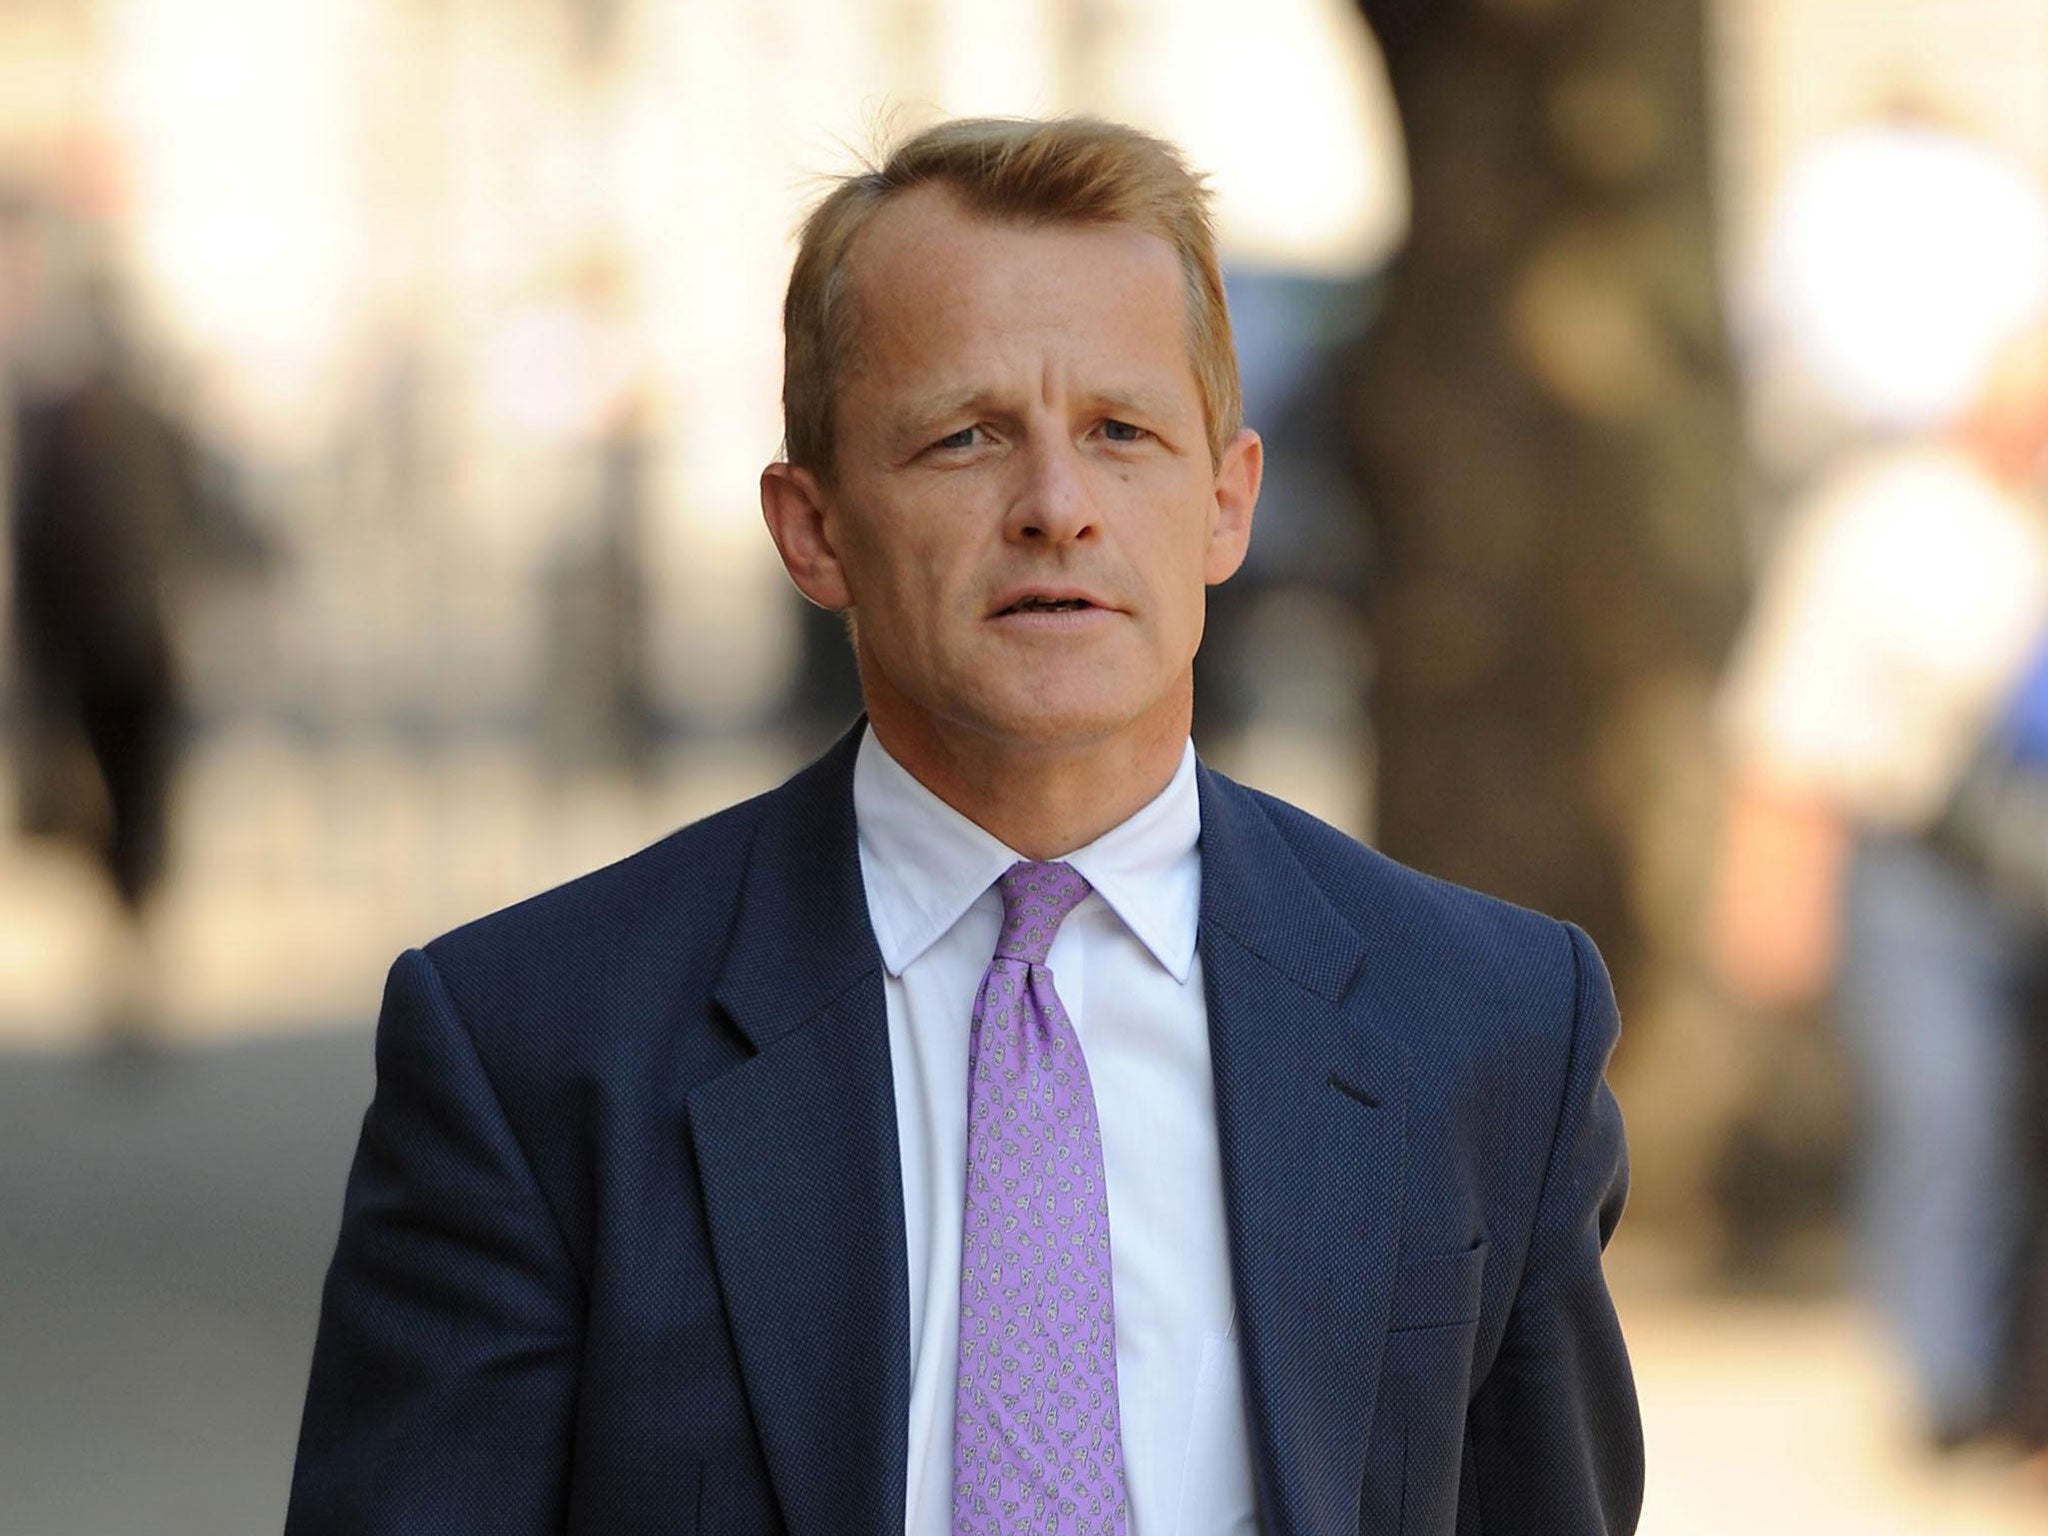 Schools Minister David Laws: 'Teachers are paid to work in the classroom'